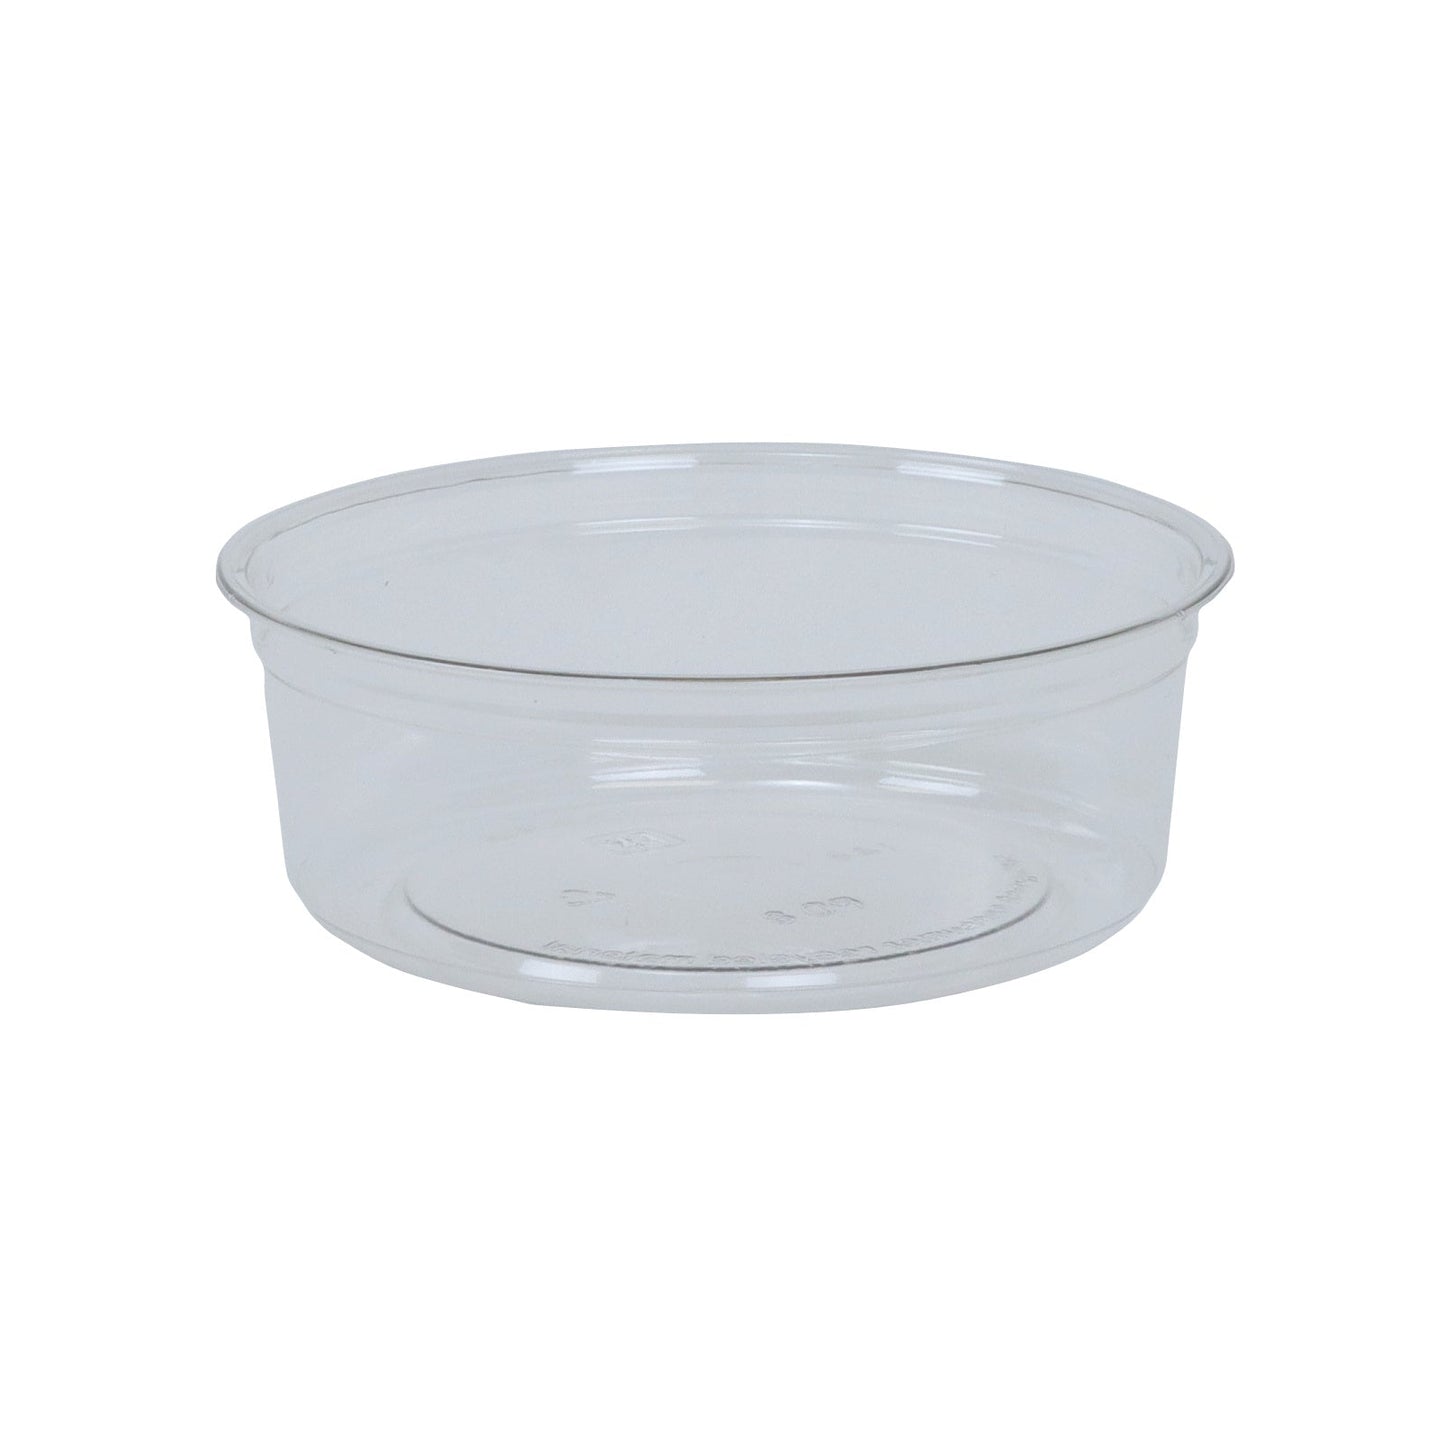 8 oz Deli Container | Recycled Plastic | Made in USA (Case of 500)